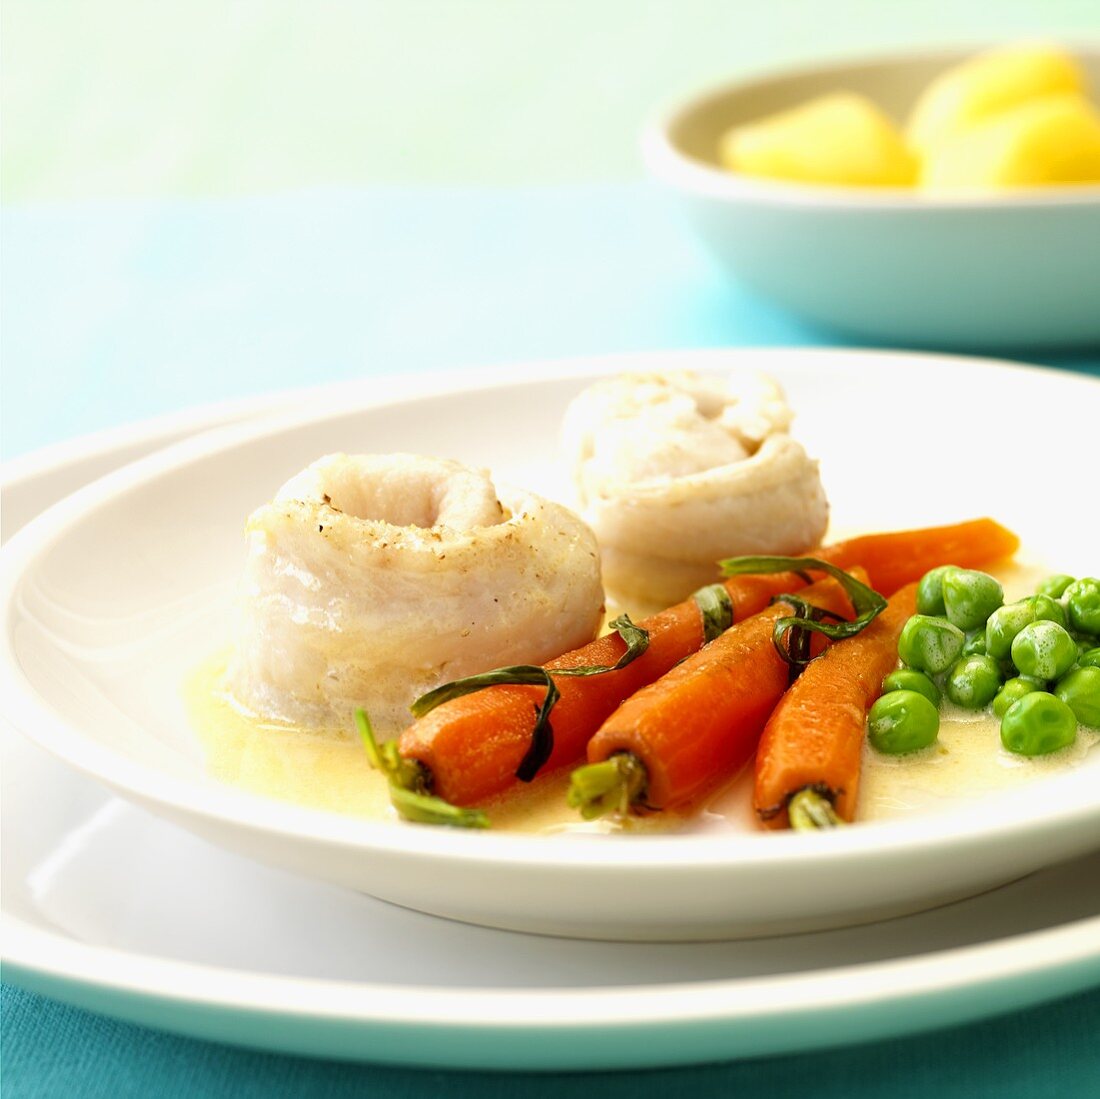 Sole rolls with carrots and peas